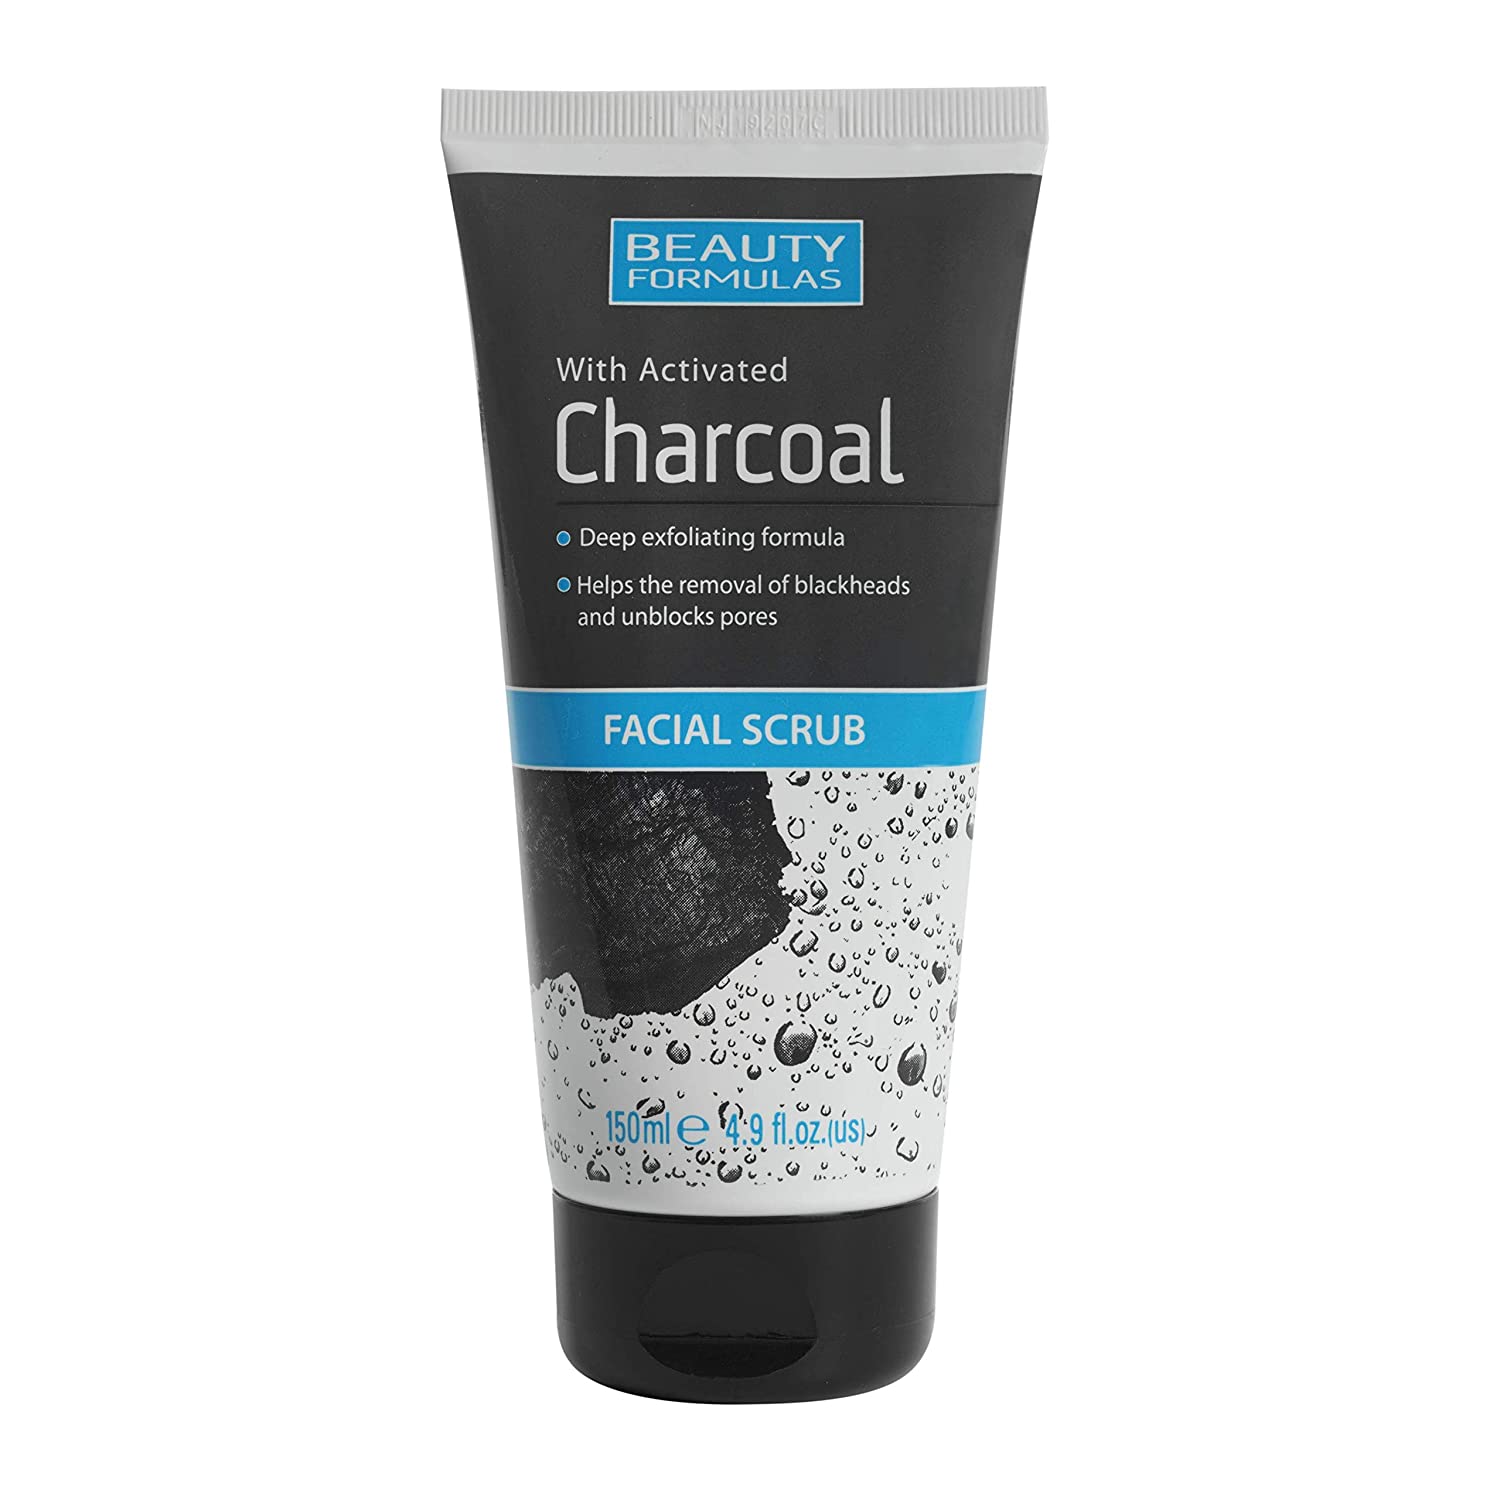 Beauty Formulas With Activated Charcoal Facial Scrub (150ml)